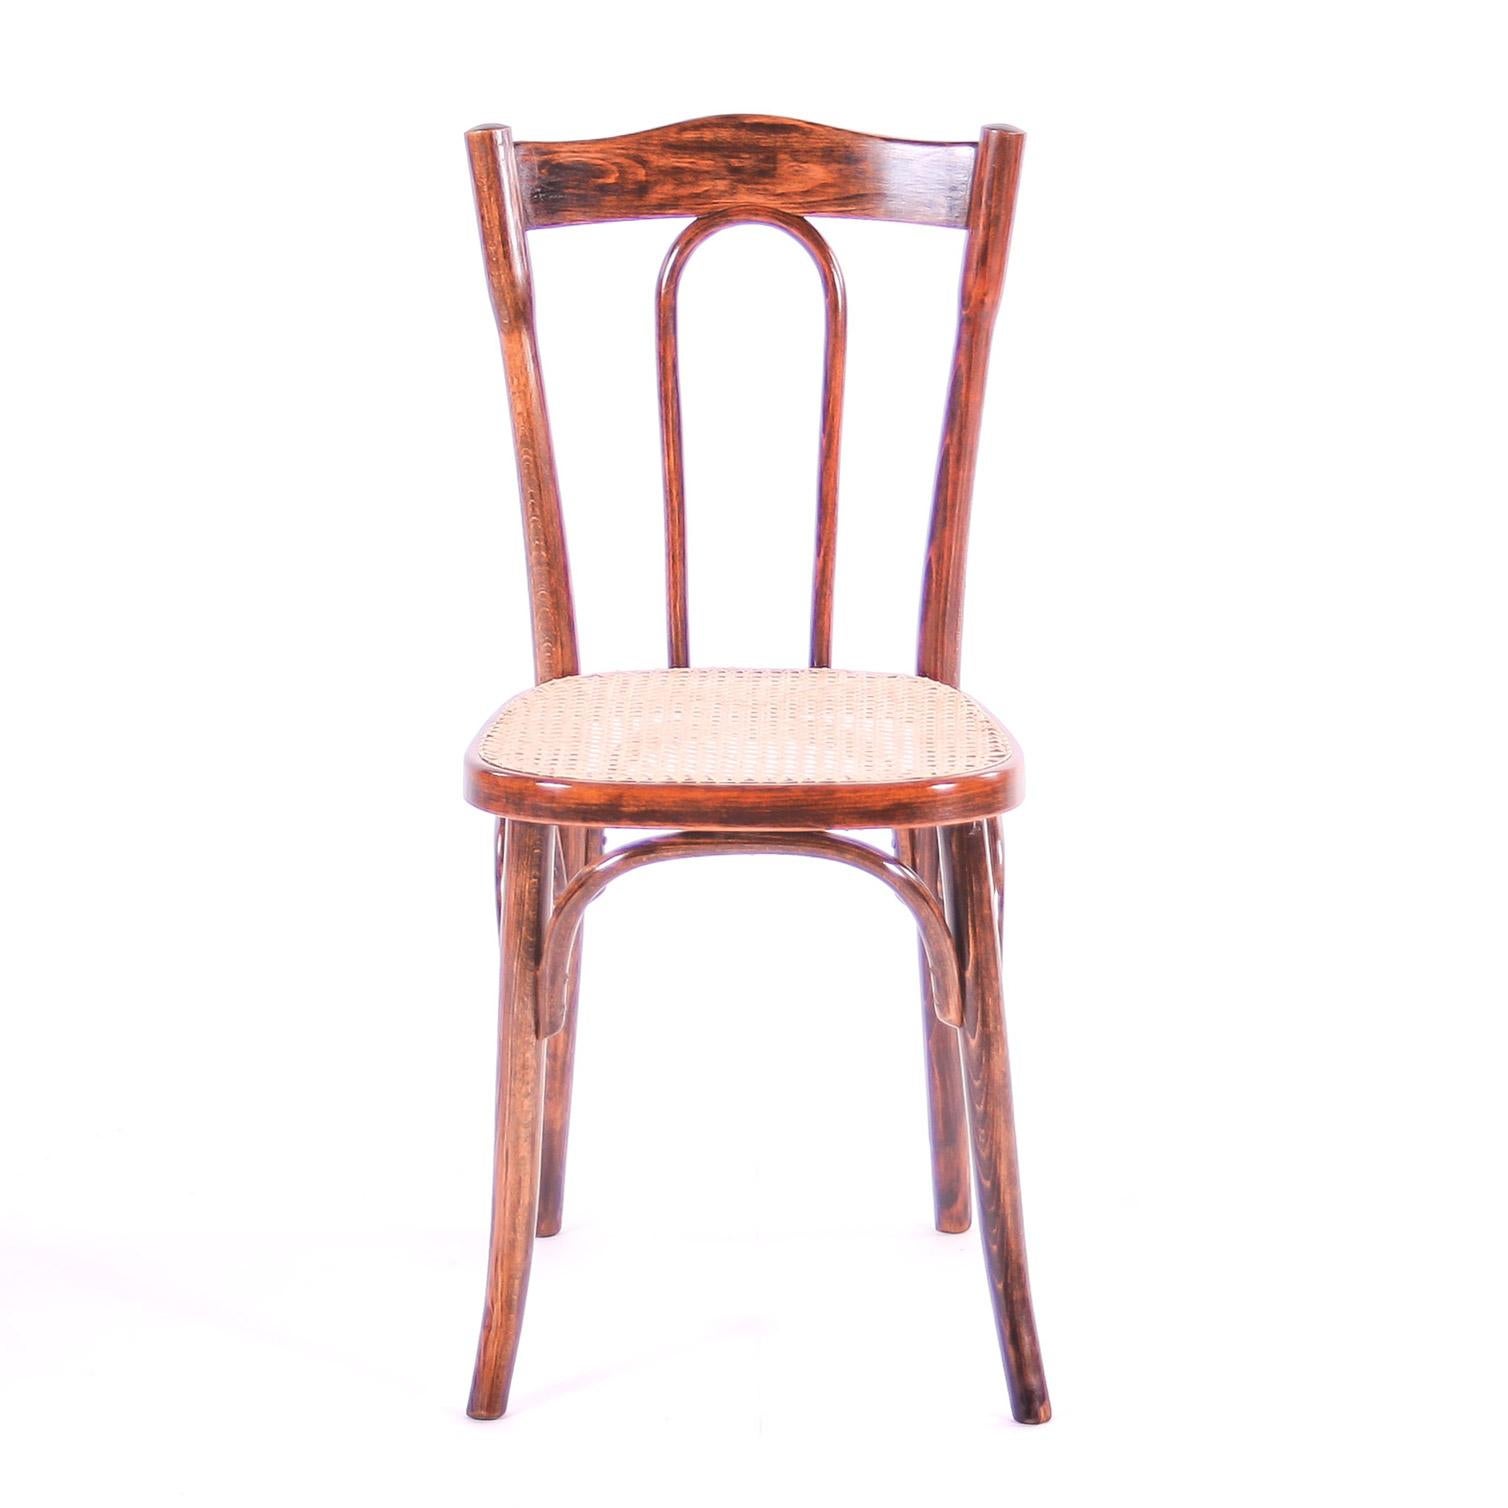 Original piece of furniture after renovation.
Classical and beautiful Thonet chair, which was made in 1900-1910. The chair is made of bent wood and the seat is handwoven with rattan. The chair is in perfect condition and is completely renovated by